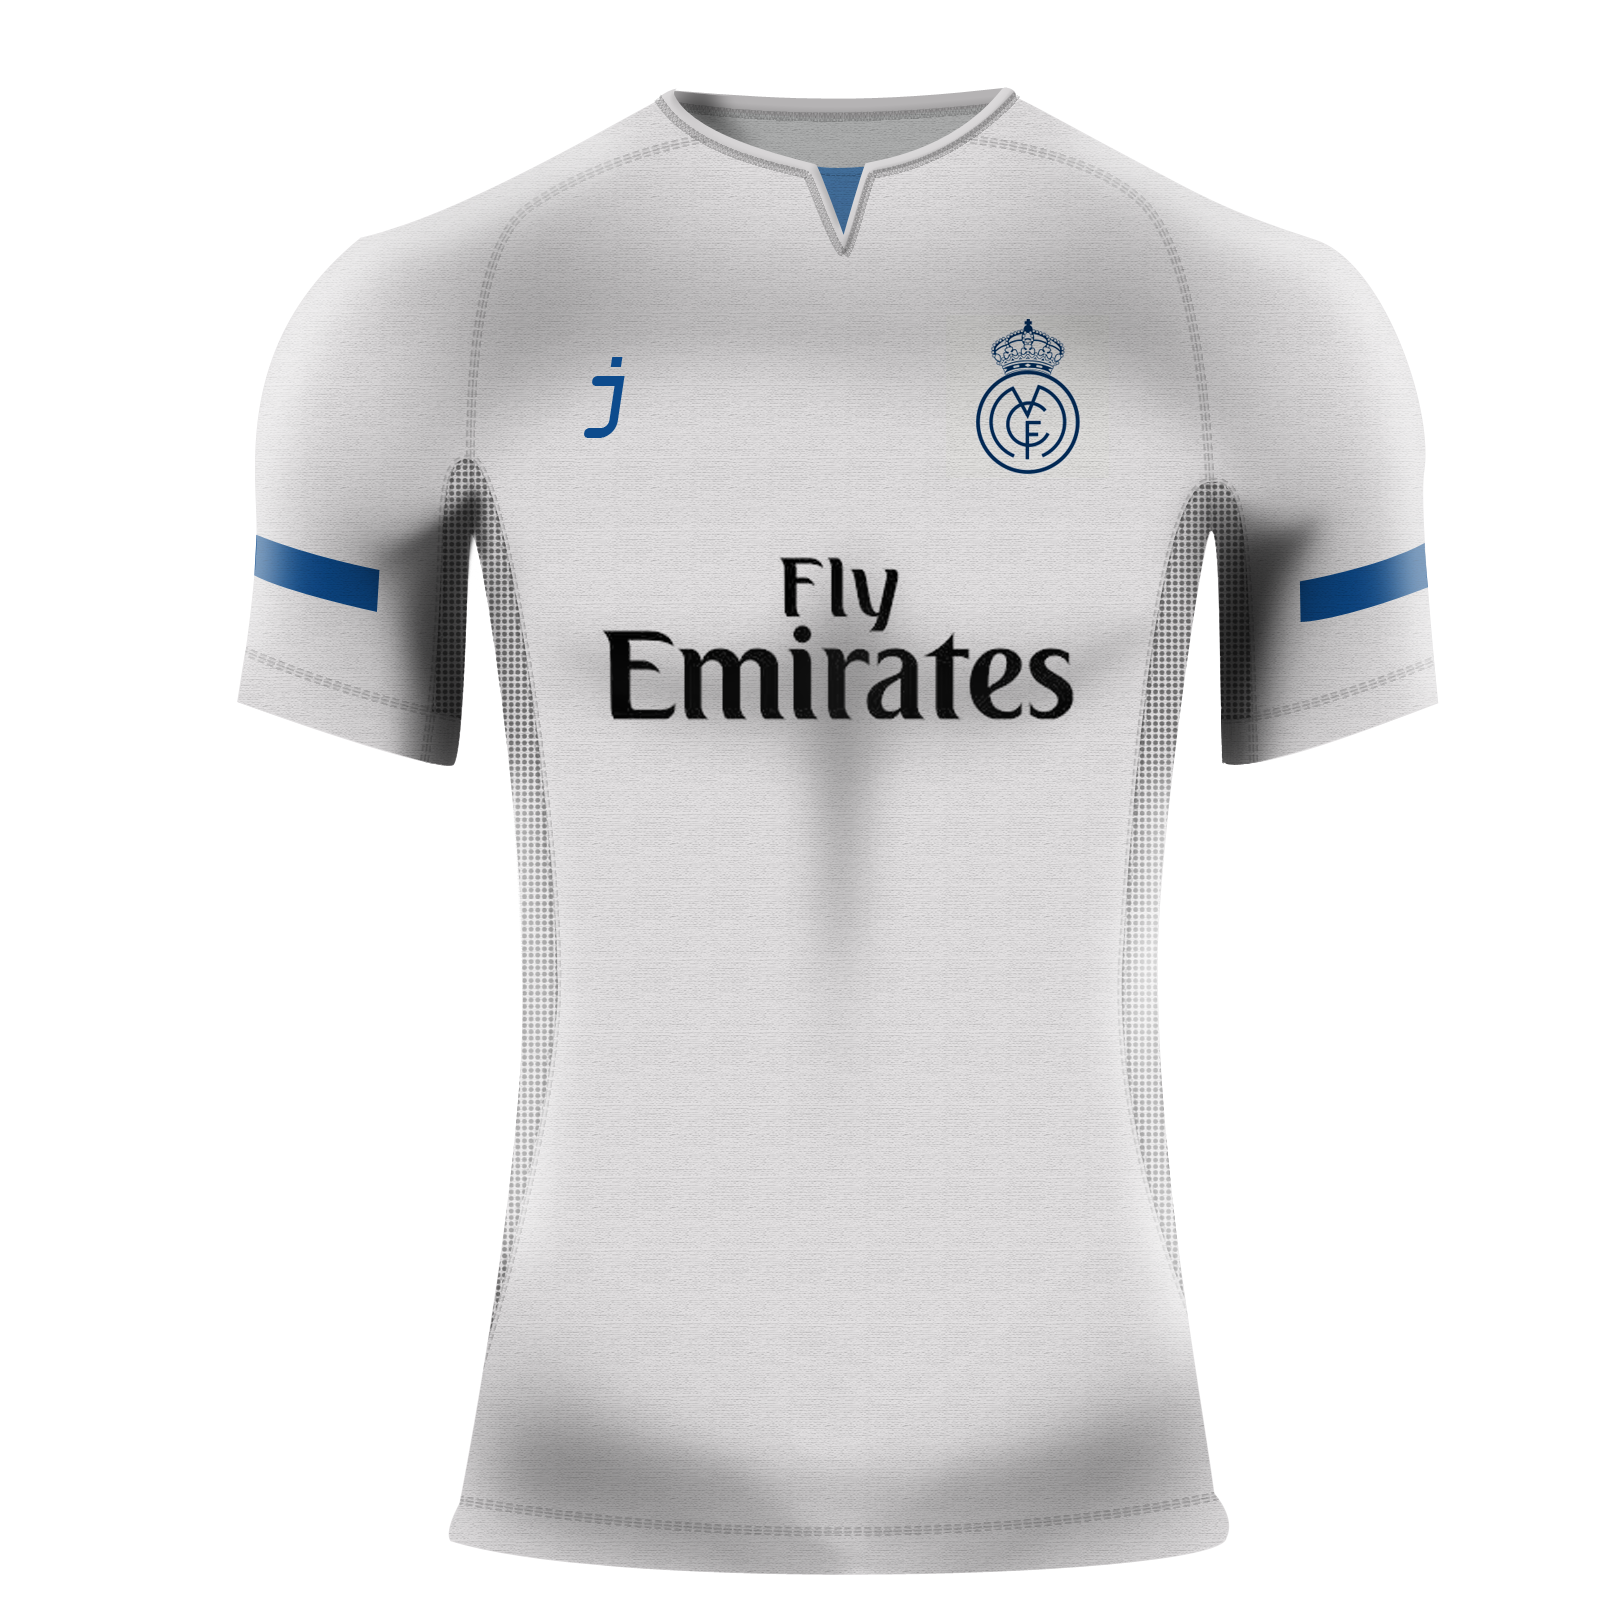 Real Madrid home shirt by J-sports